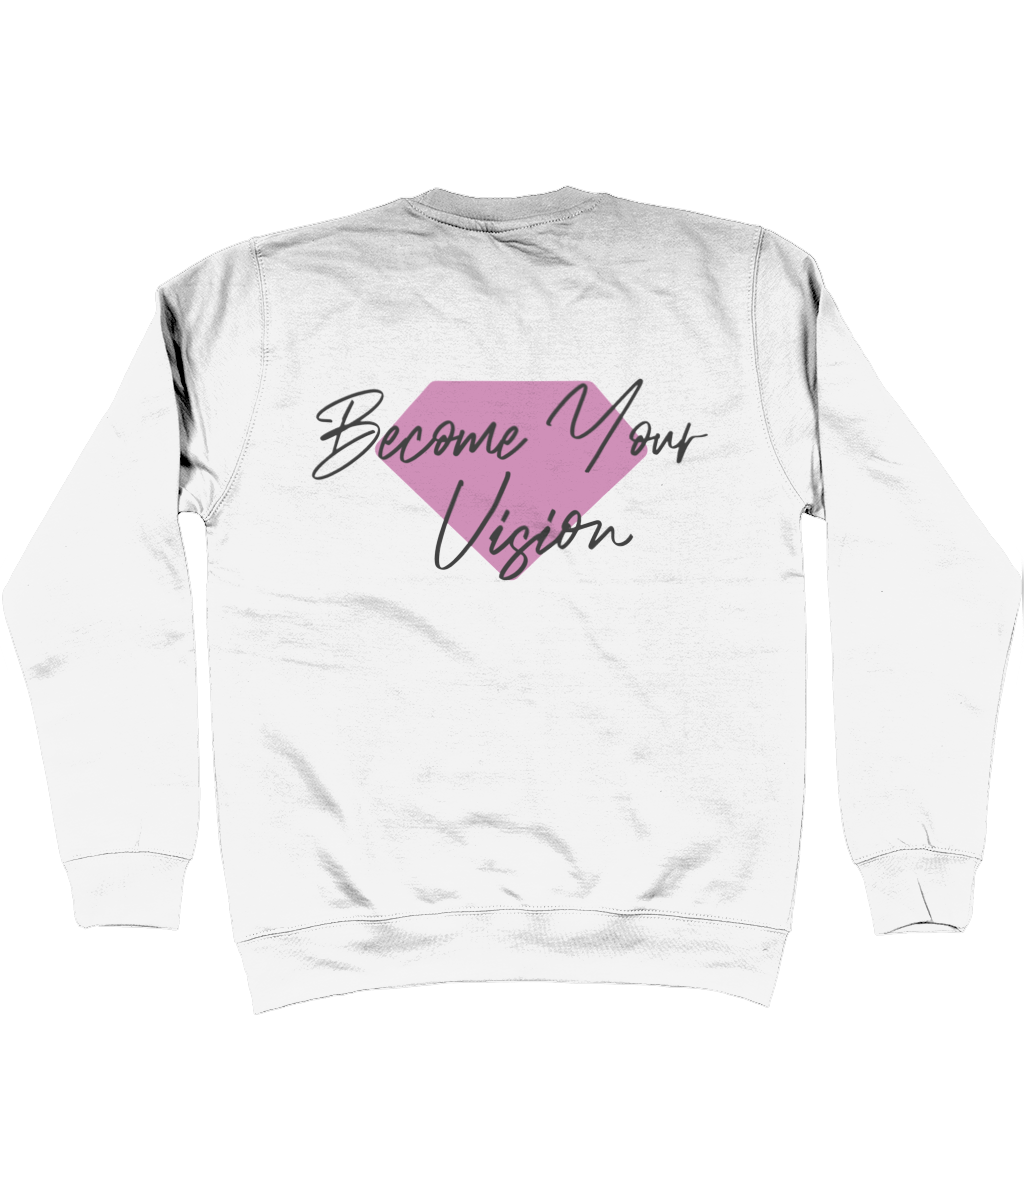 BECOME YOUR VISION SWEATSHIRT